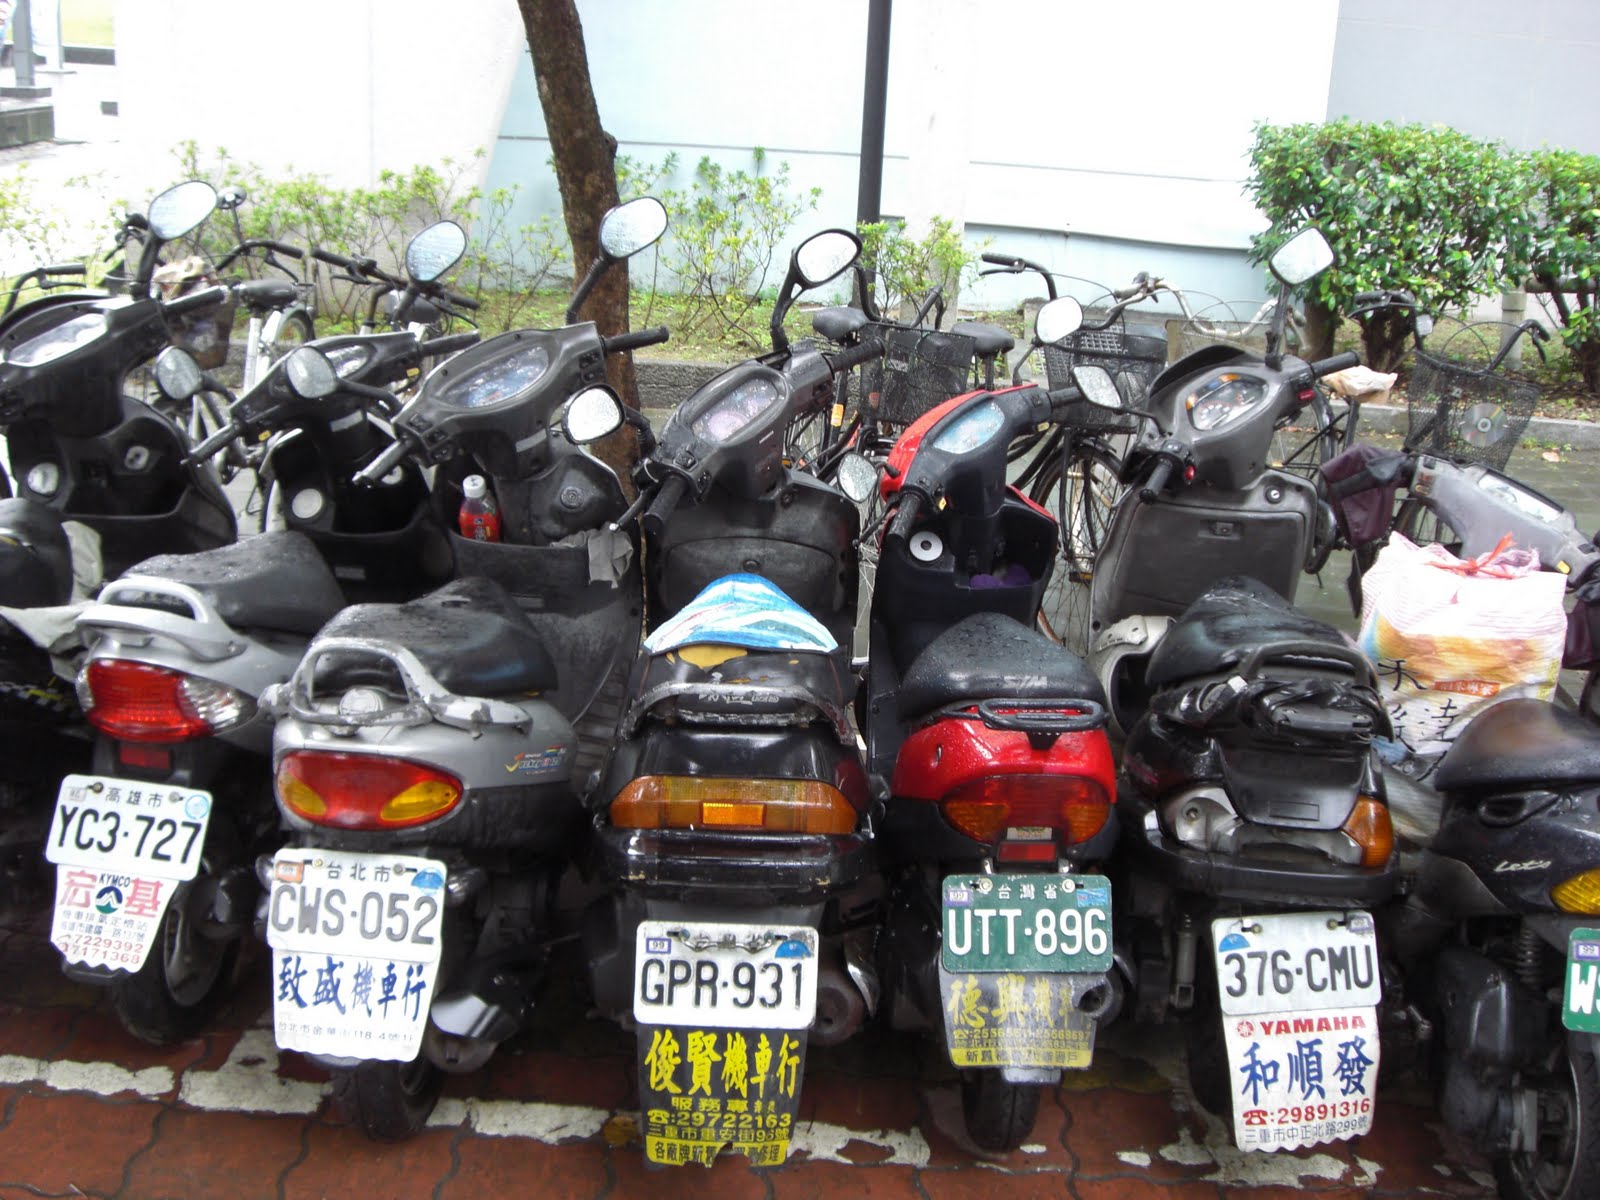 motorcycle parking size malaysia - Steven Pullman